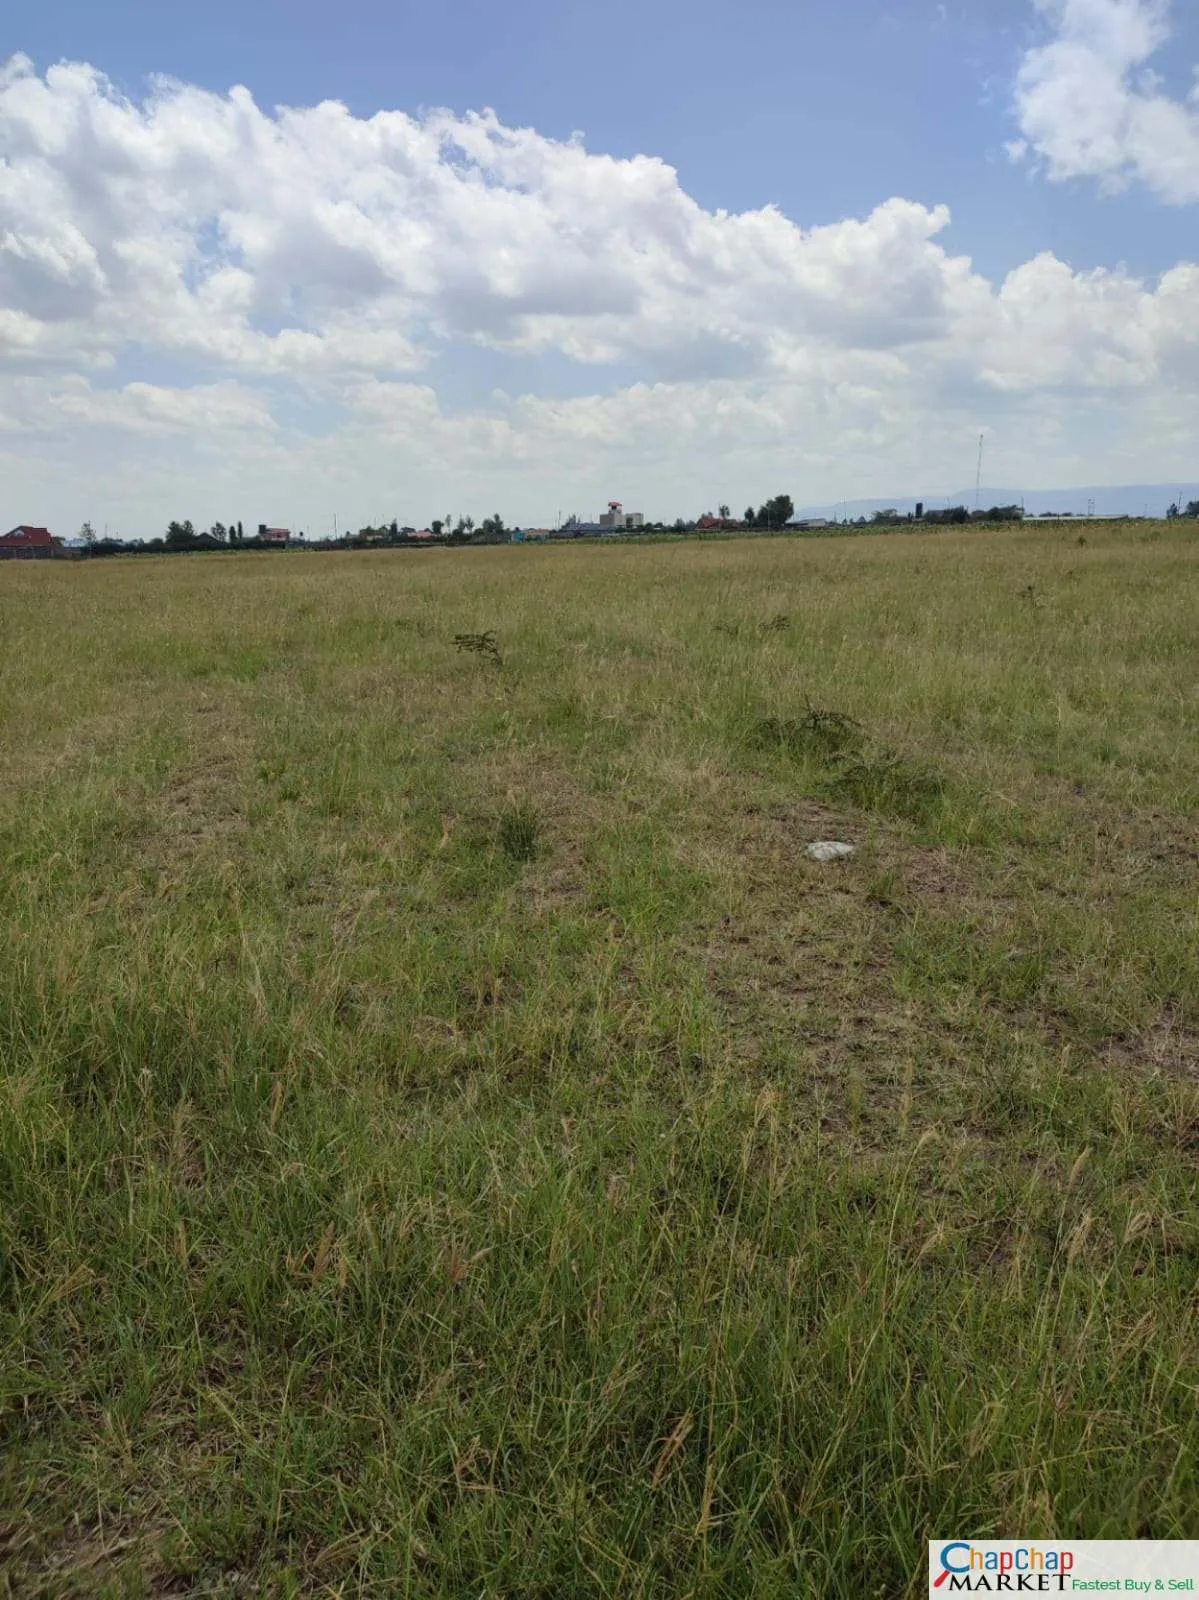 Land For Sale Real Estate-Land for Sale in Nakuru 6 acres for sale Eastgate Nakuru QUICK SALE Clean Title Deed 9